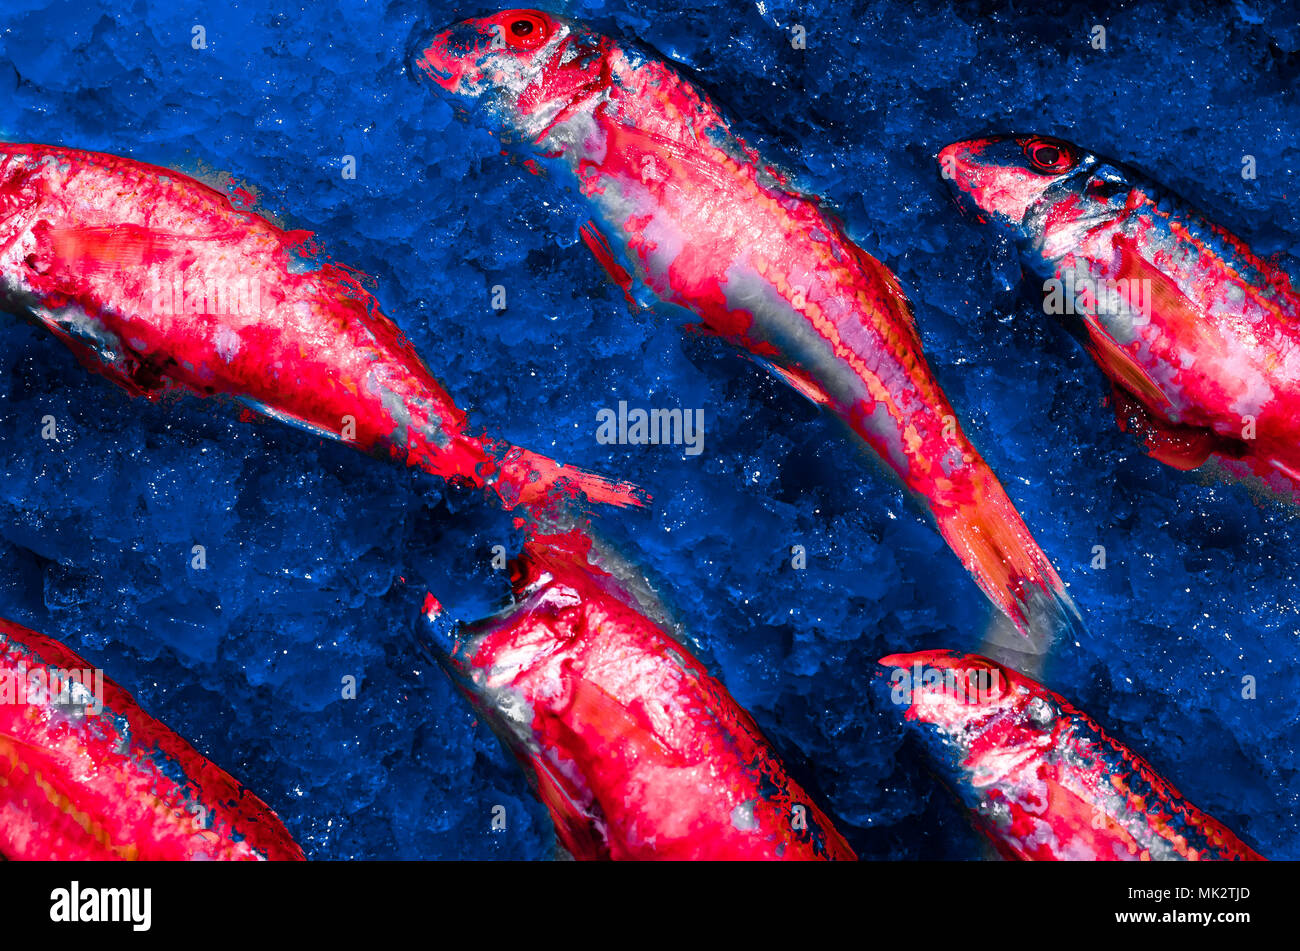 Colorful illustration of fresh fish on a market stall Stock Photo